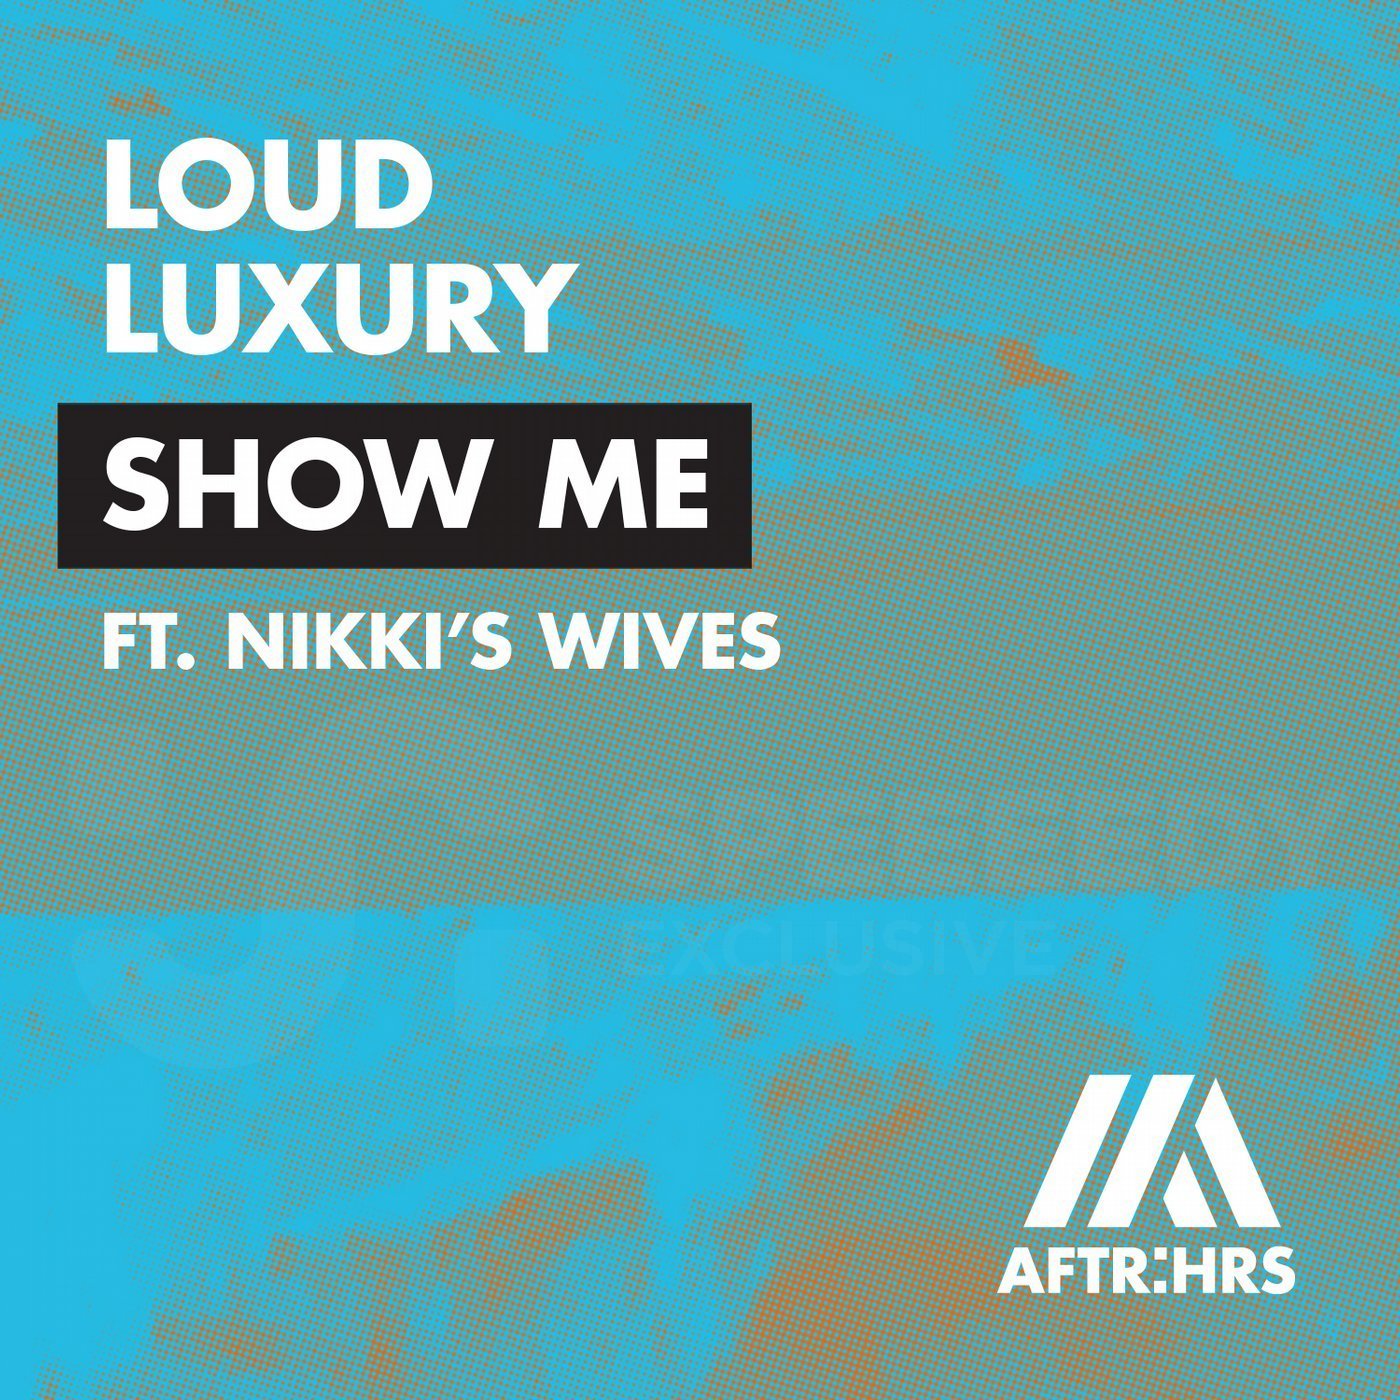 Loud Luxury, Nikki's Wives - Show Me feat. Nikki's Wives (Extended Mix)